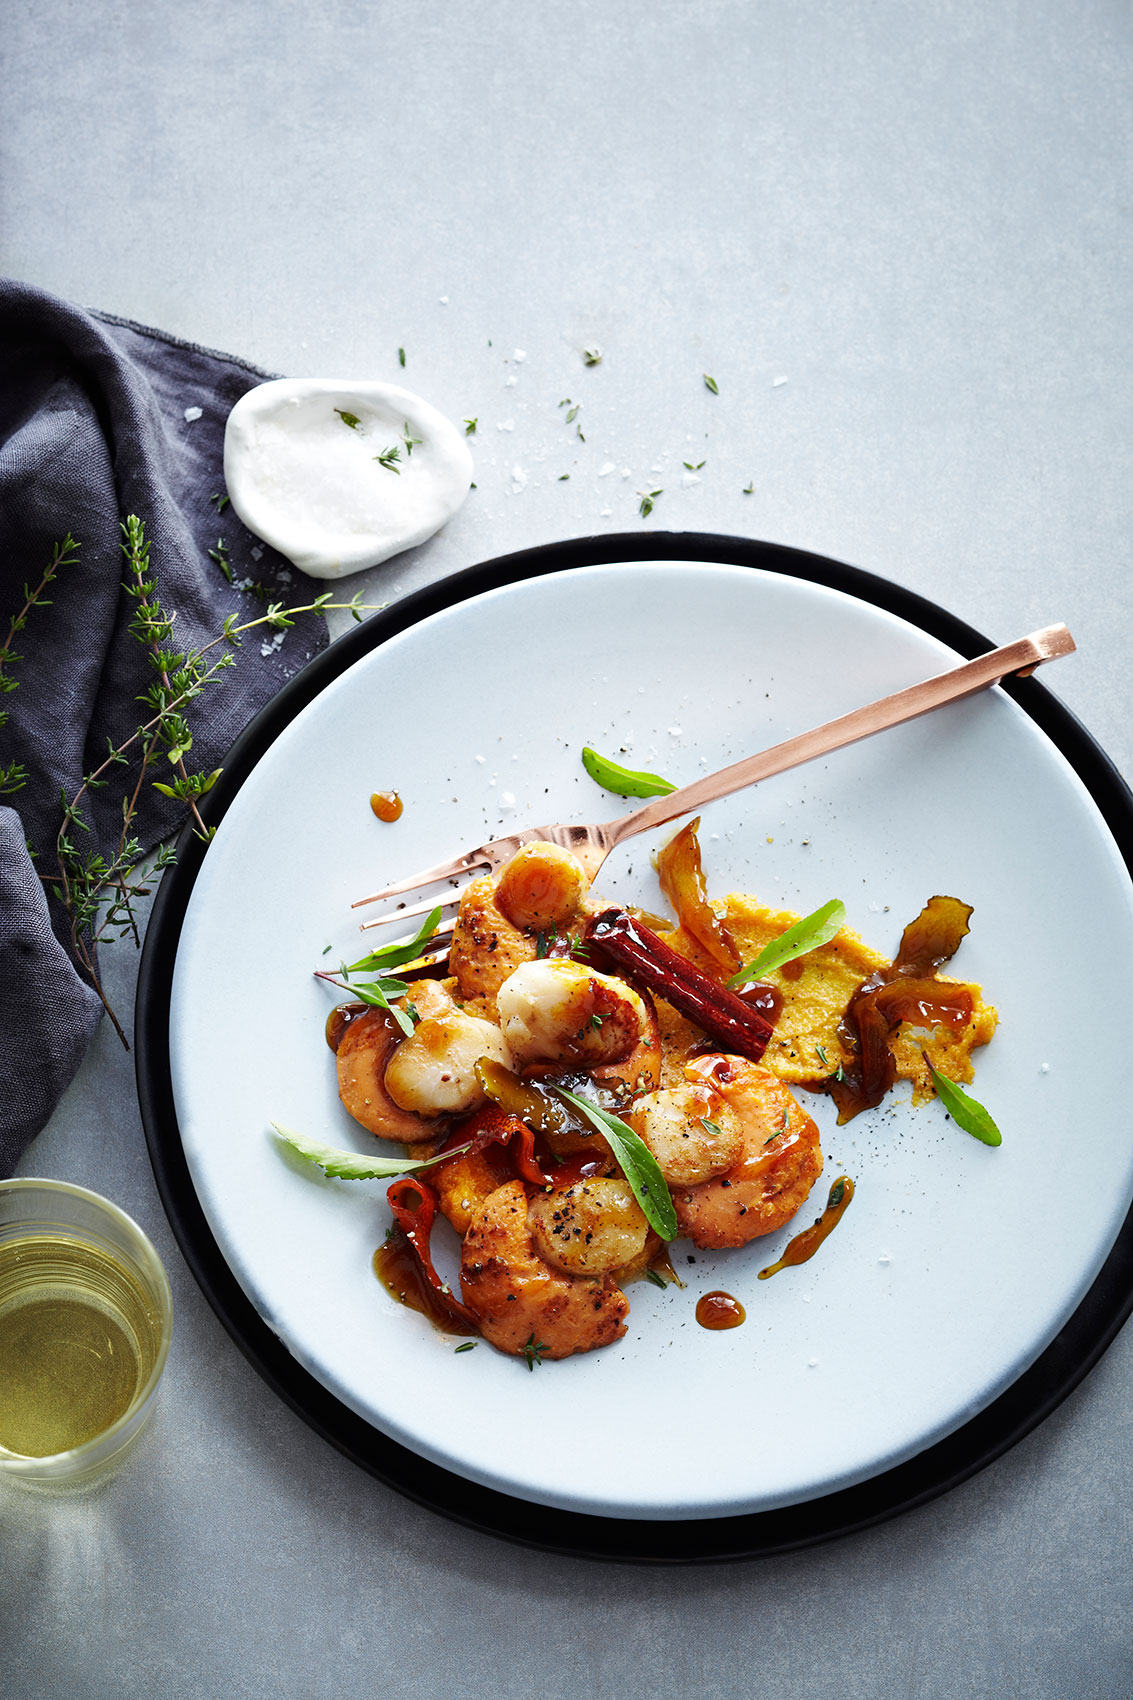 Spice Health Heroes • Diver Scallops with Fresh Thyme & Cinnamon • Cookbook & Editorial Food Photography